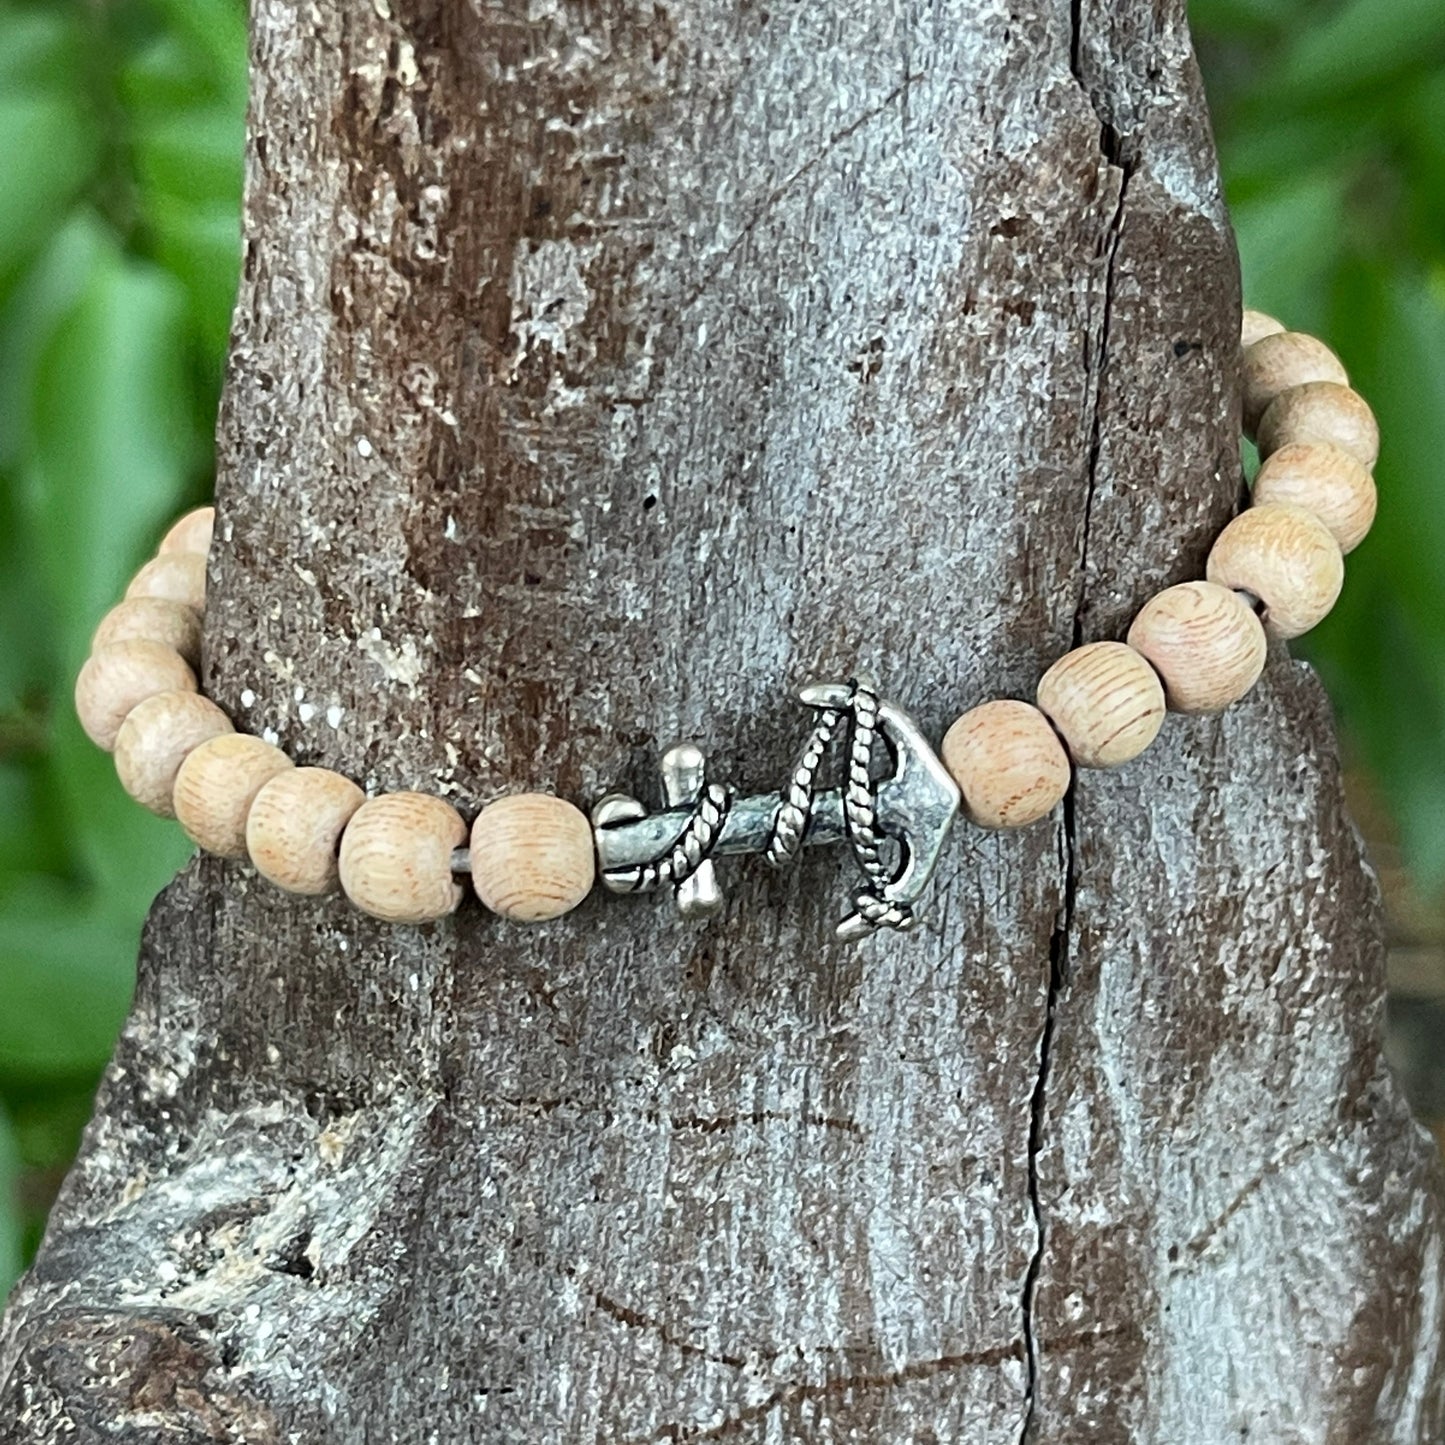 "Spiritual Navigation" Silver Anchor Charm Wood Bead Anklet